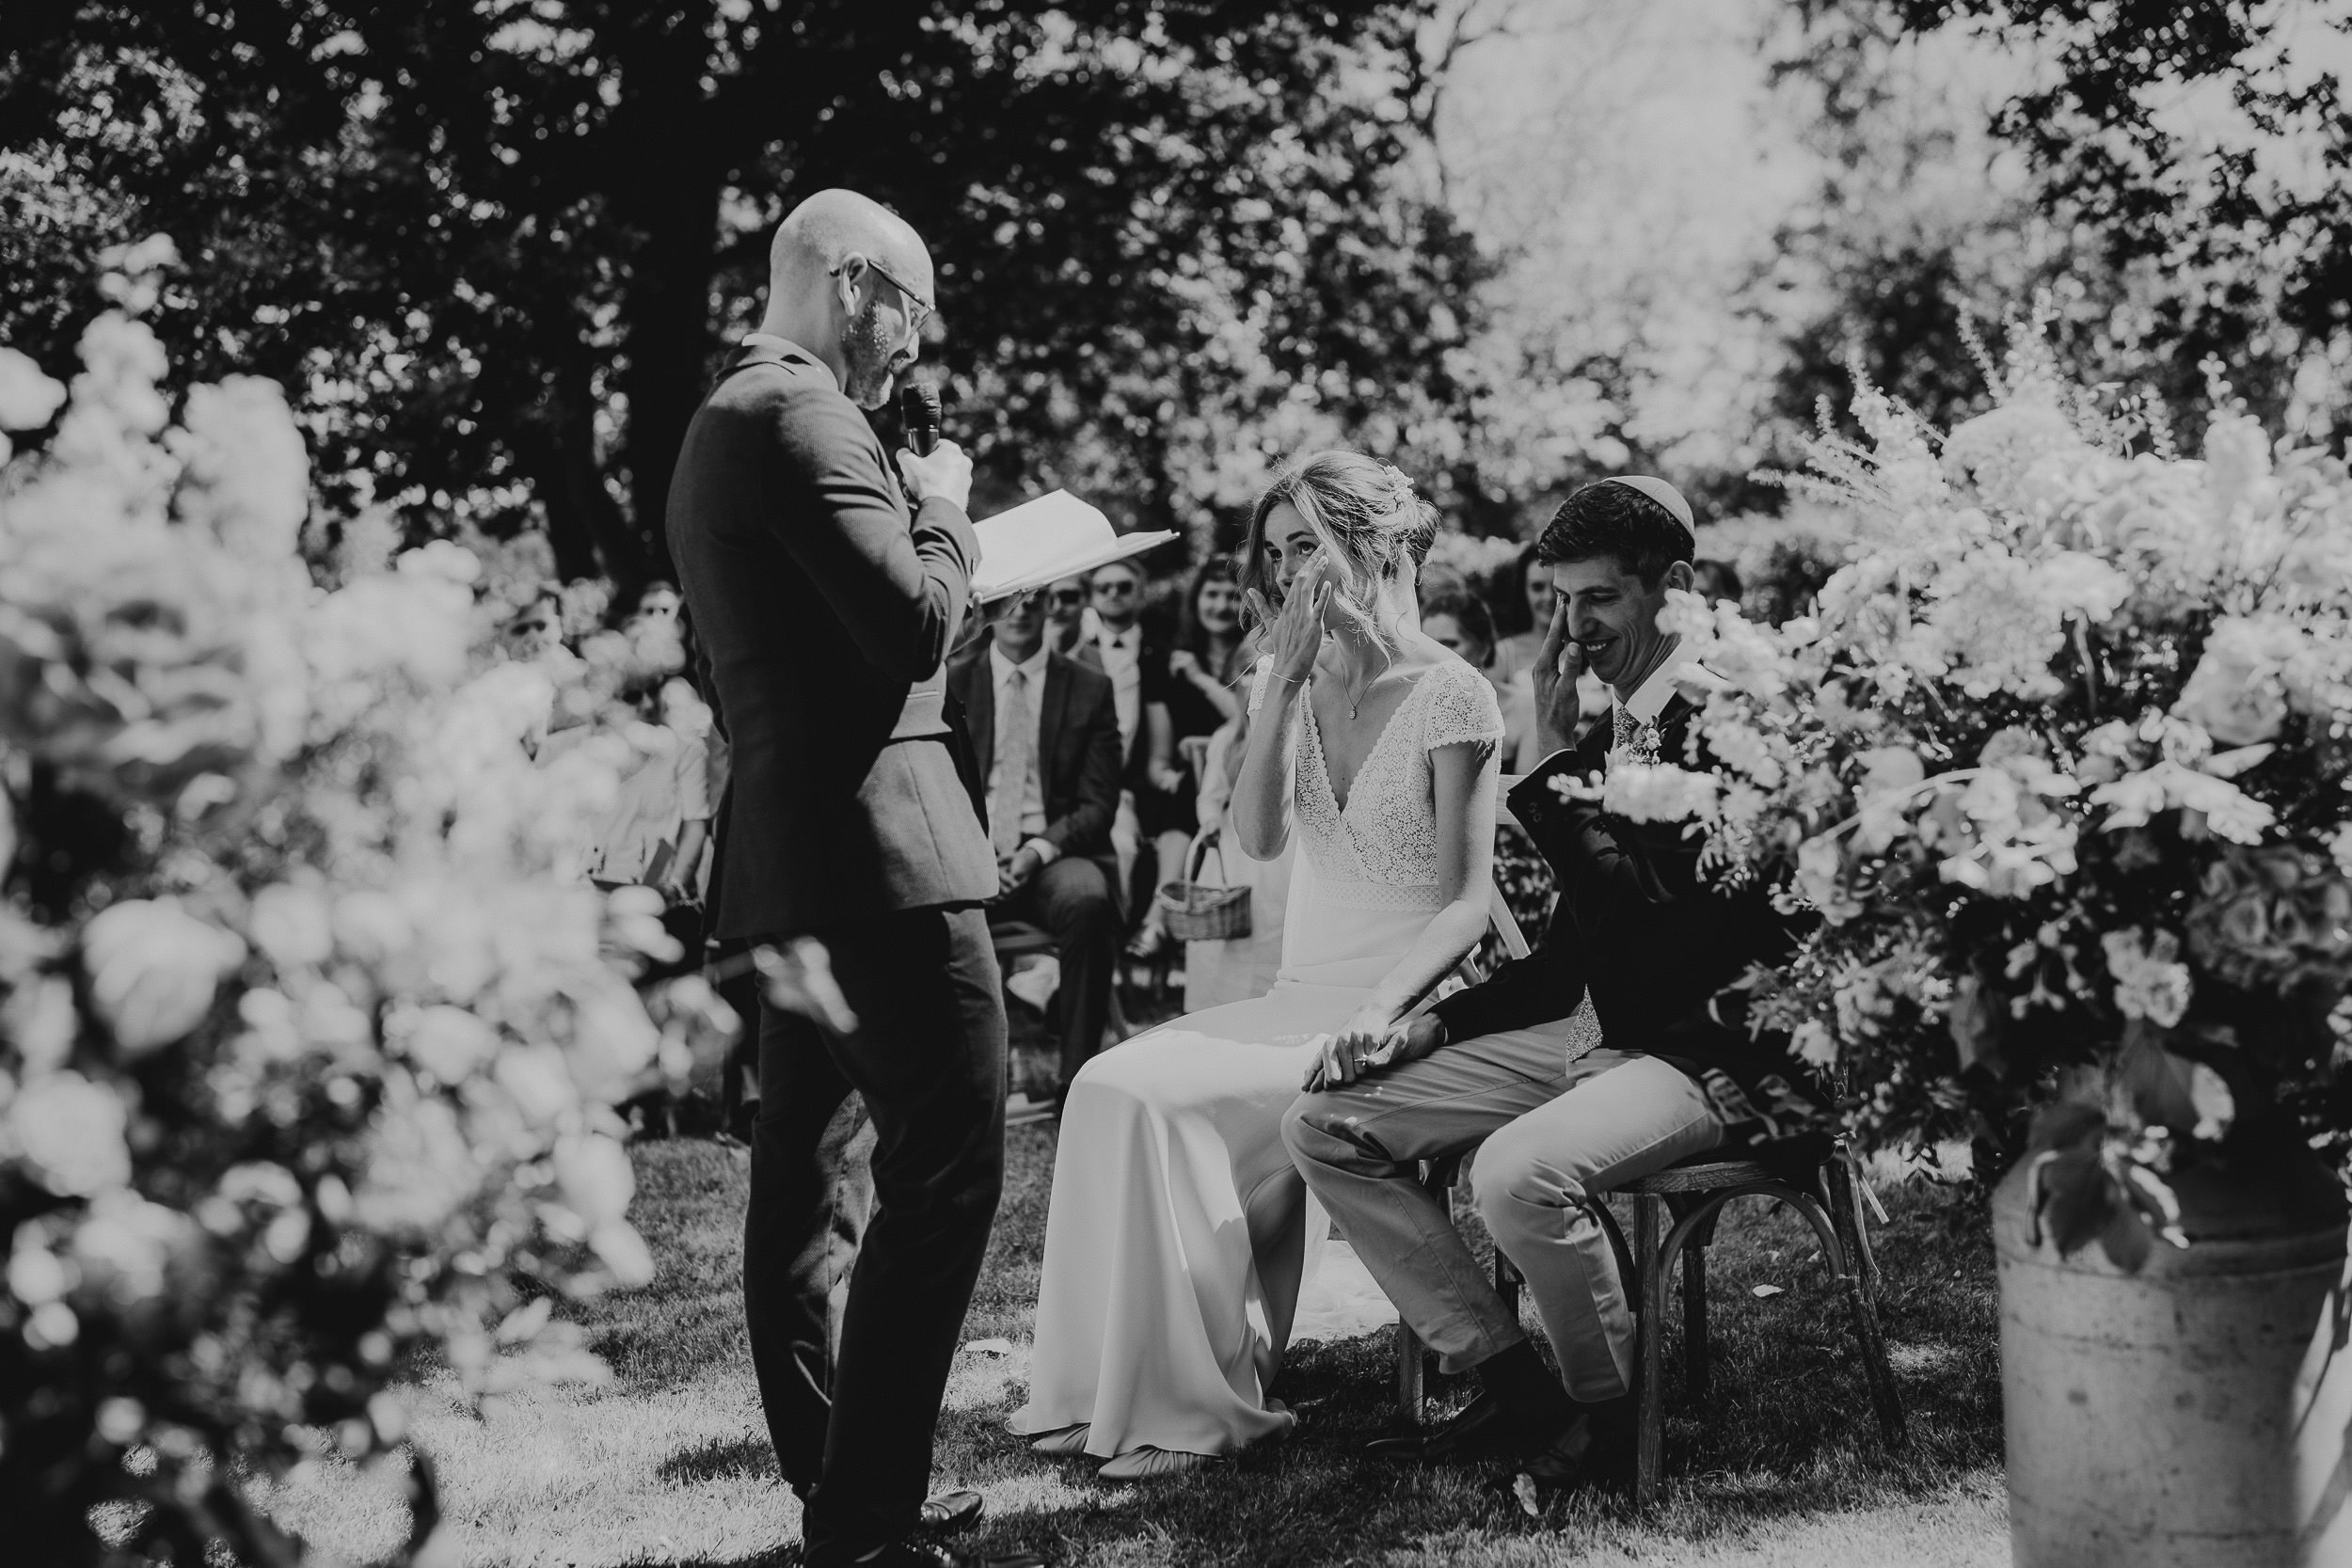 A black and white wedding photograph capturing the beautiful ceremony in a garden.